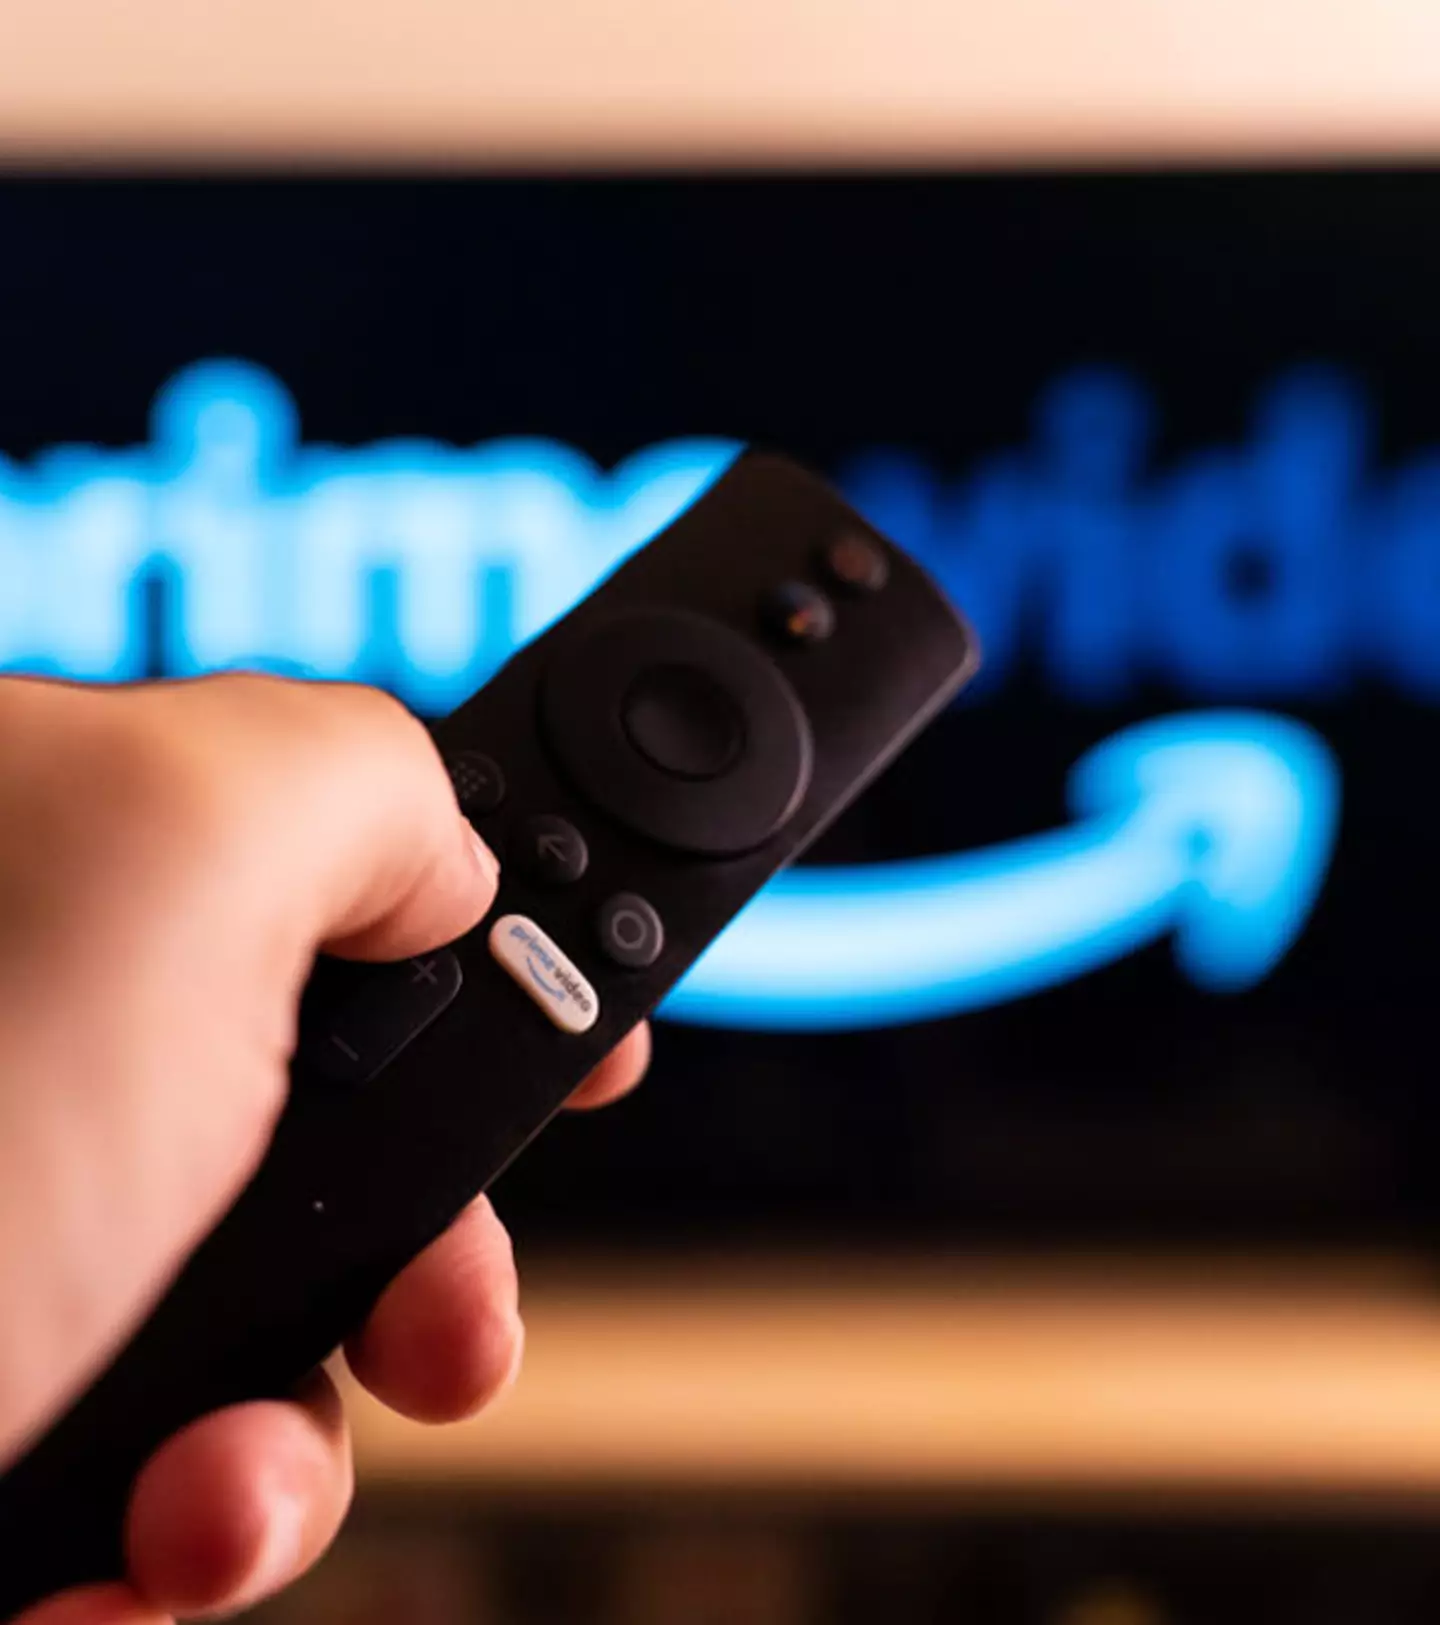 Amazon customers will have to pay an extra $2.99 to experience ad-free streaming / NurPhoto / Getty 